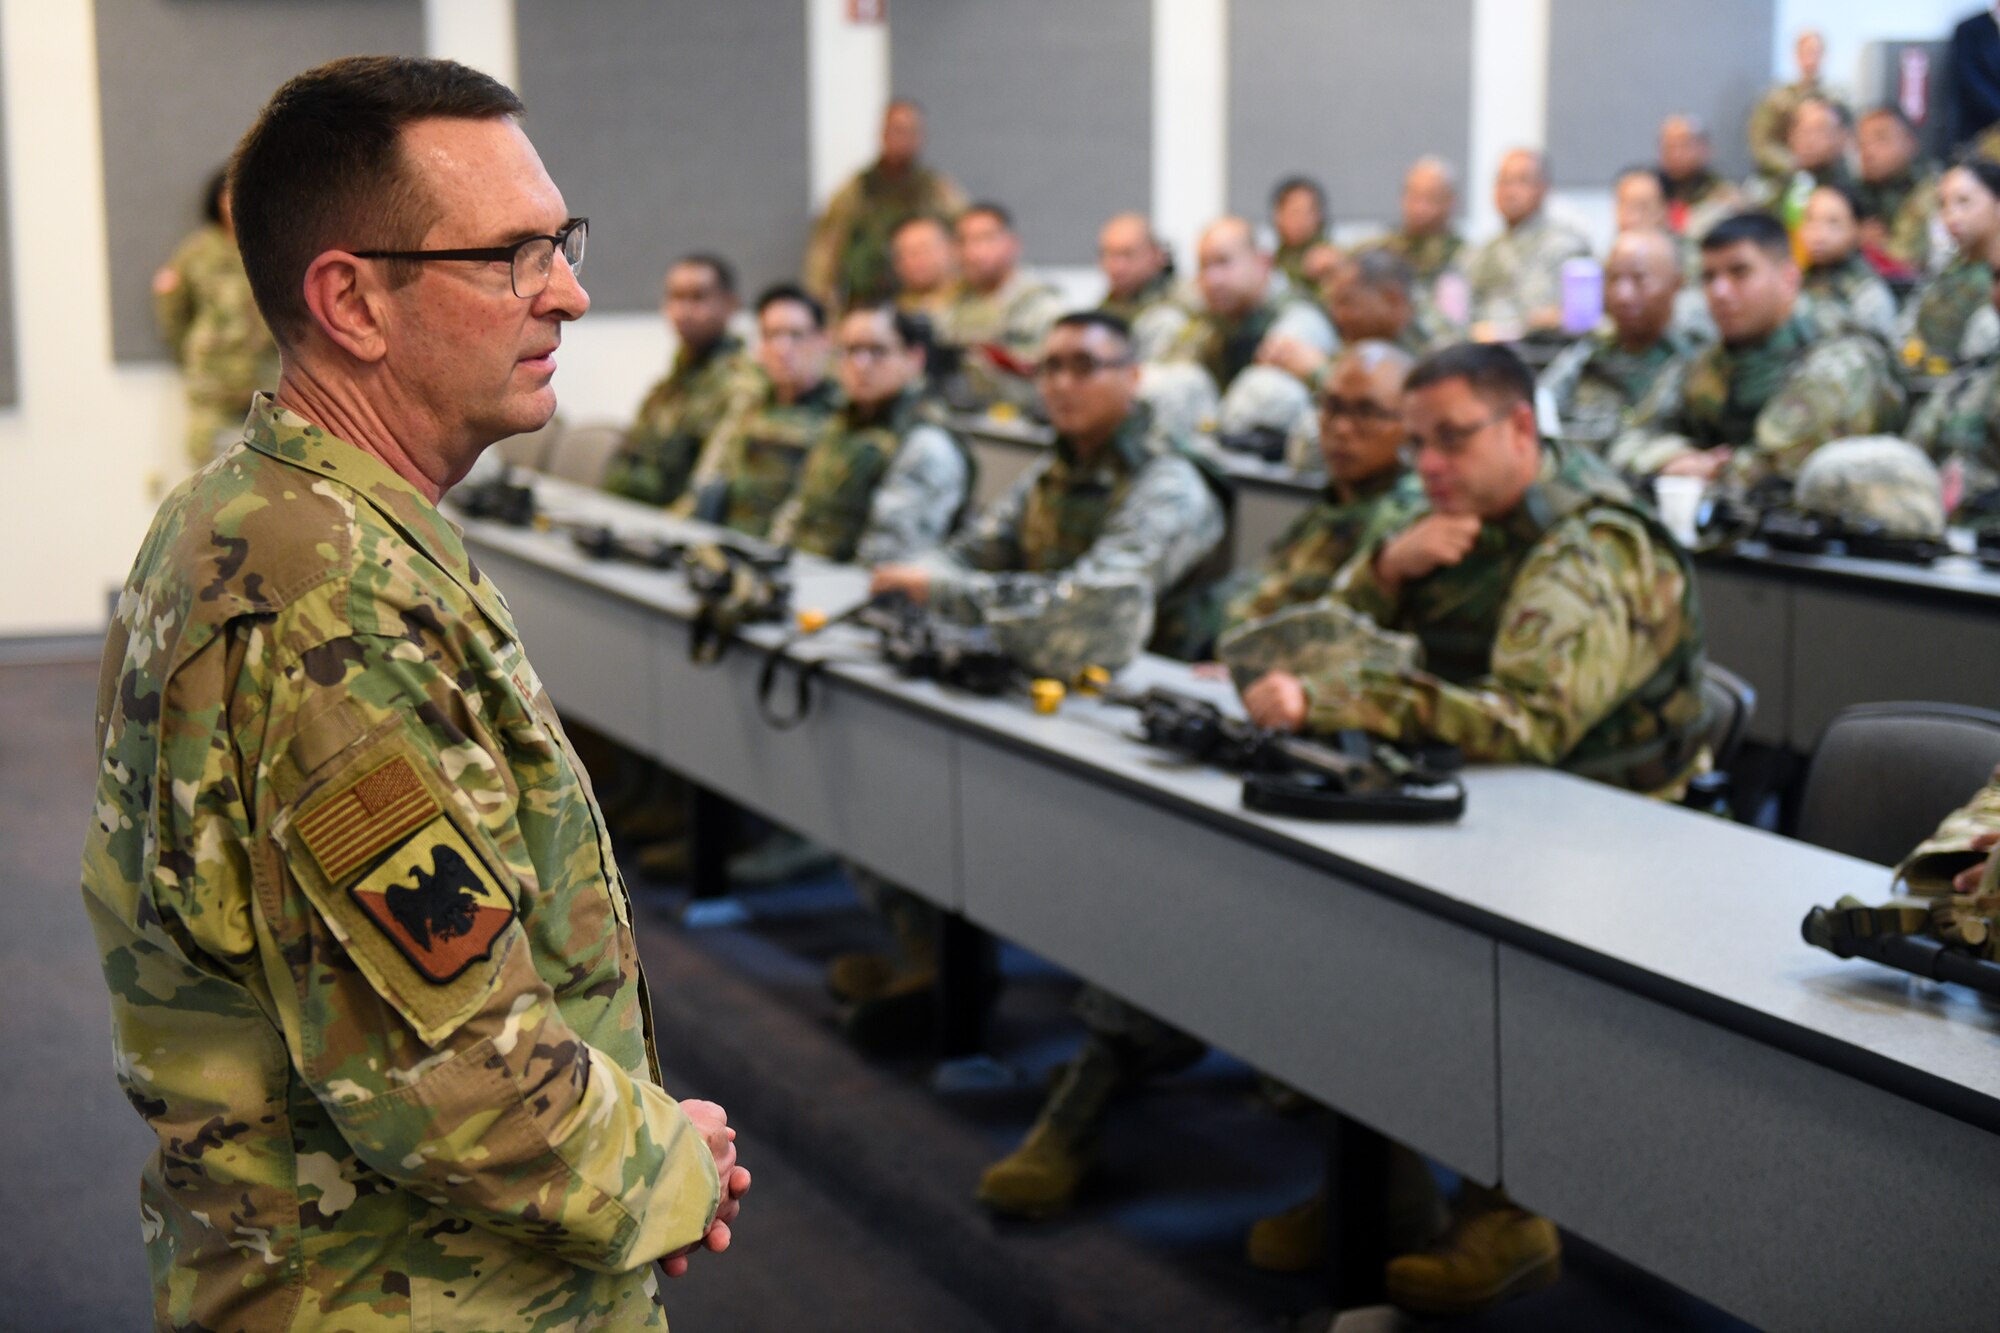 U.S. Air Force Gen. Joseph Lengyel, chief, National Guard Bureau, talks with members of the Red Horse Squadron serving with the Guam Air National Guard, Guam, Jan. 29, 2020. (U.S. Army National Guard photo by Sgt. 1st Class Jim Greenhill)